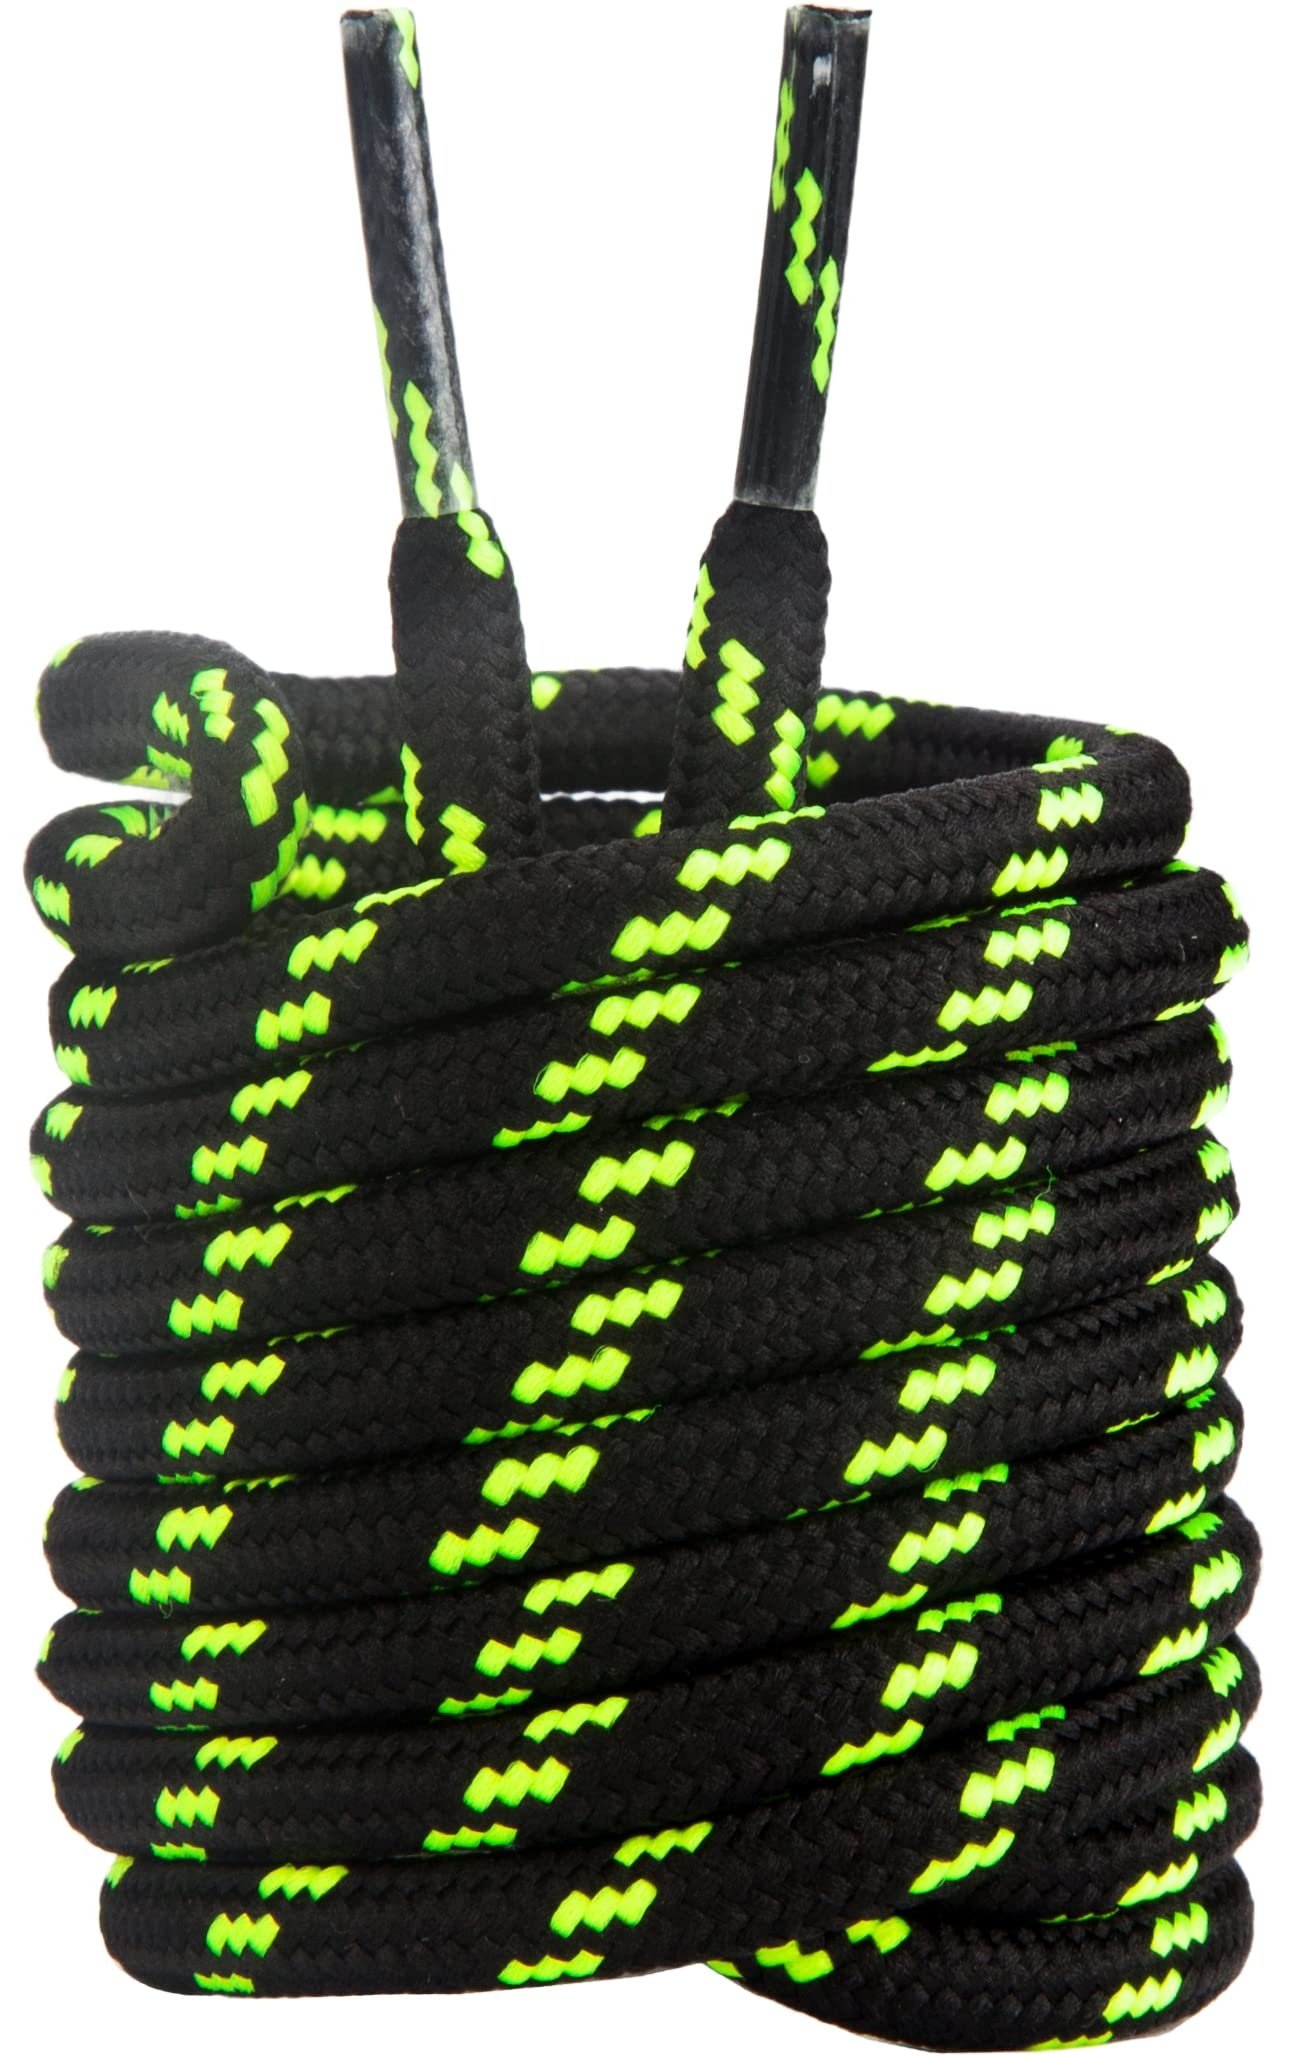 Tolumo Diameter 4.5 MM Round Durable Boot Laces Lengths 100 to 160 CM Shoelaces for Work and Leisure Boots, Hiking Shoes Black Green 160 CM 1 Pair - 160cm - 1 Pair